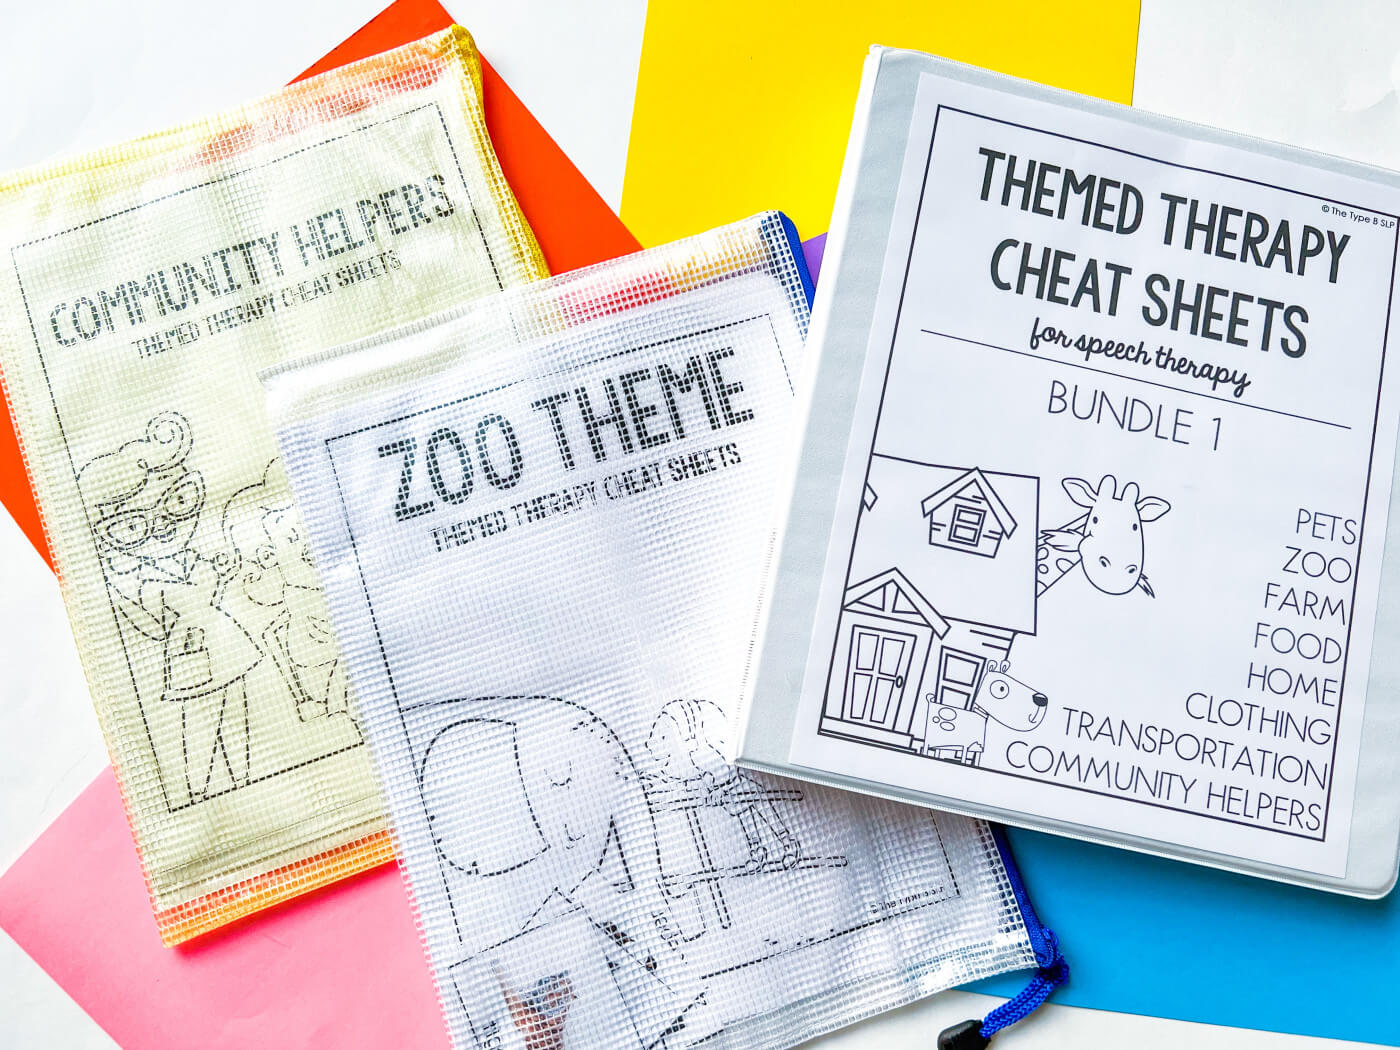  Themed Therapy Cheat Sheets - Bundle